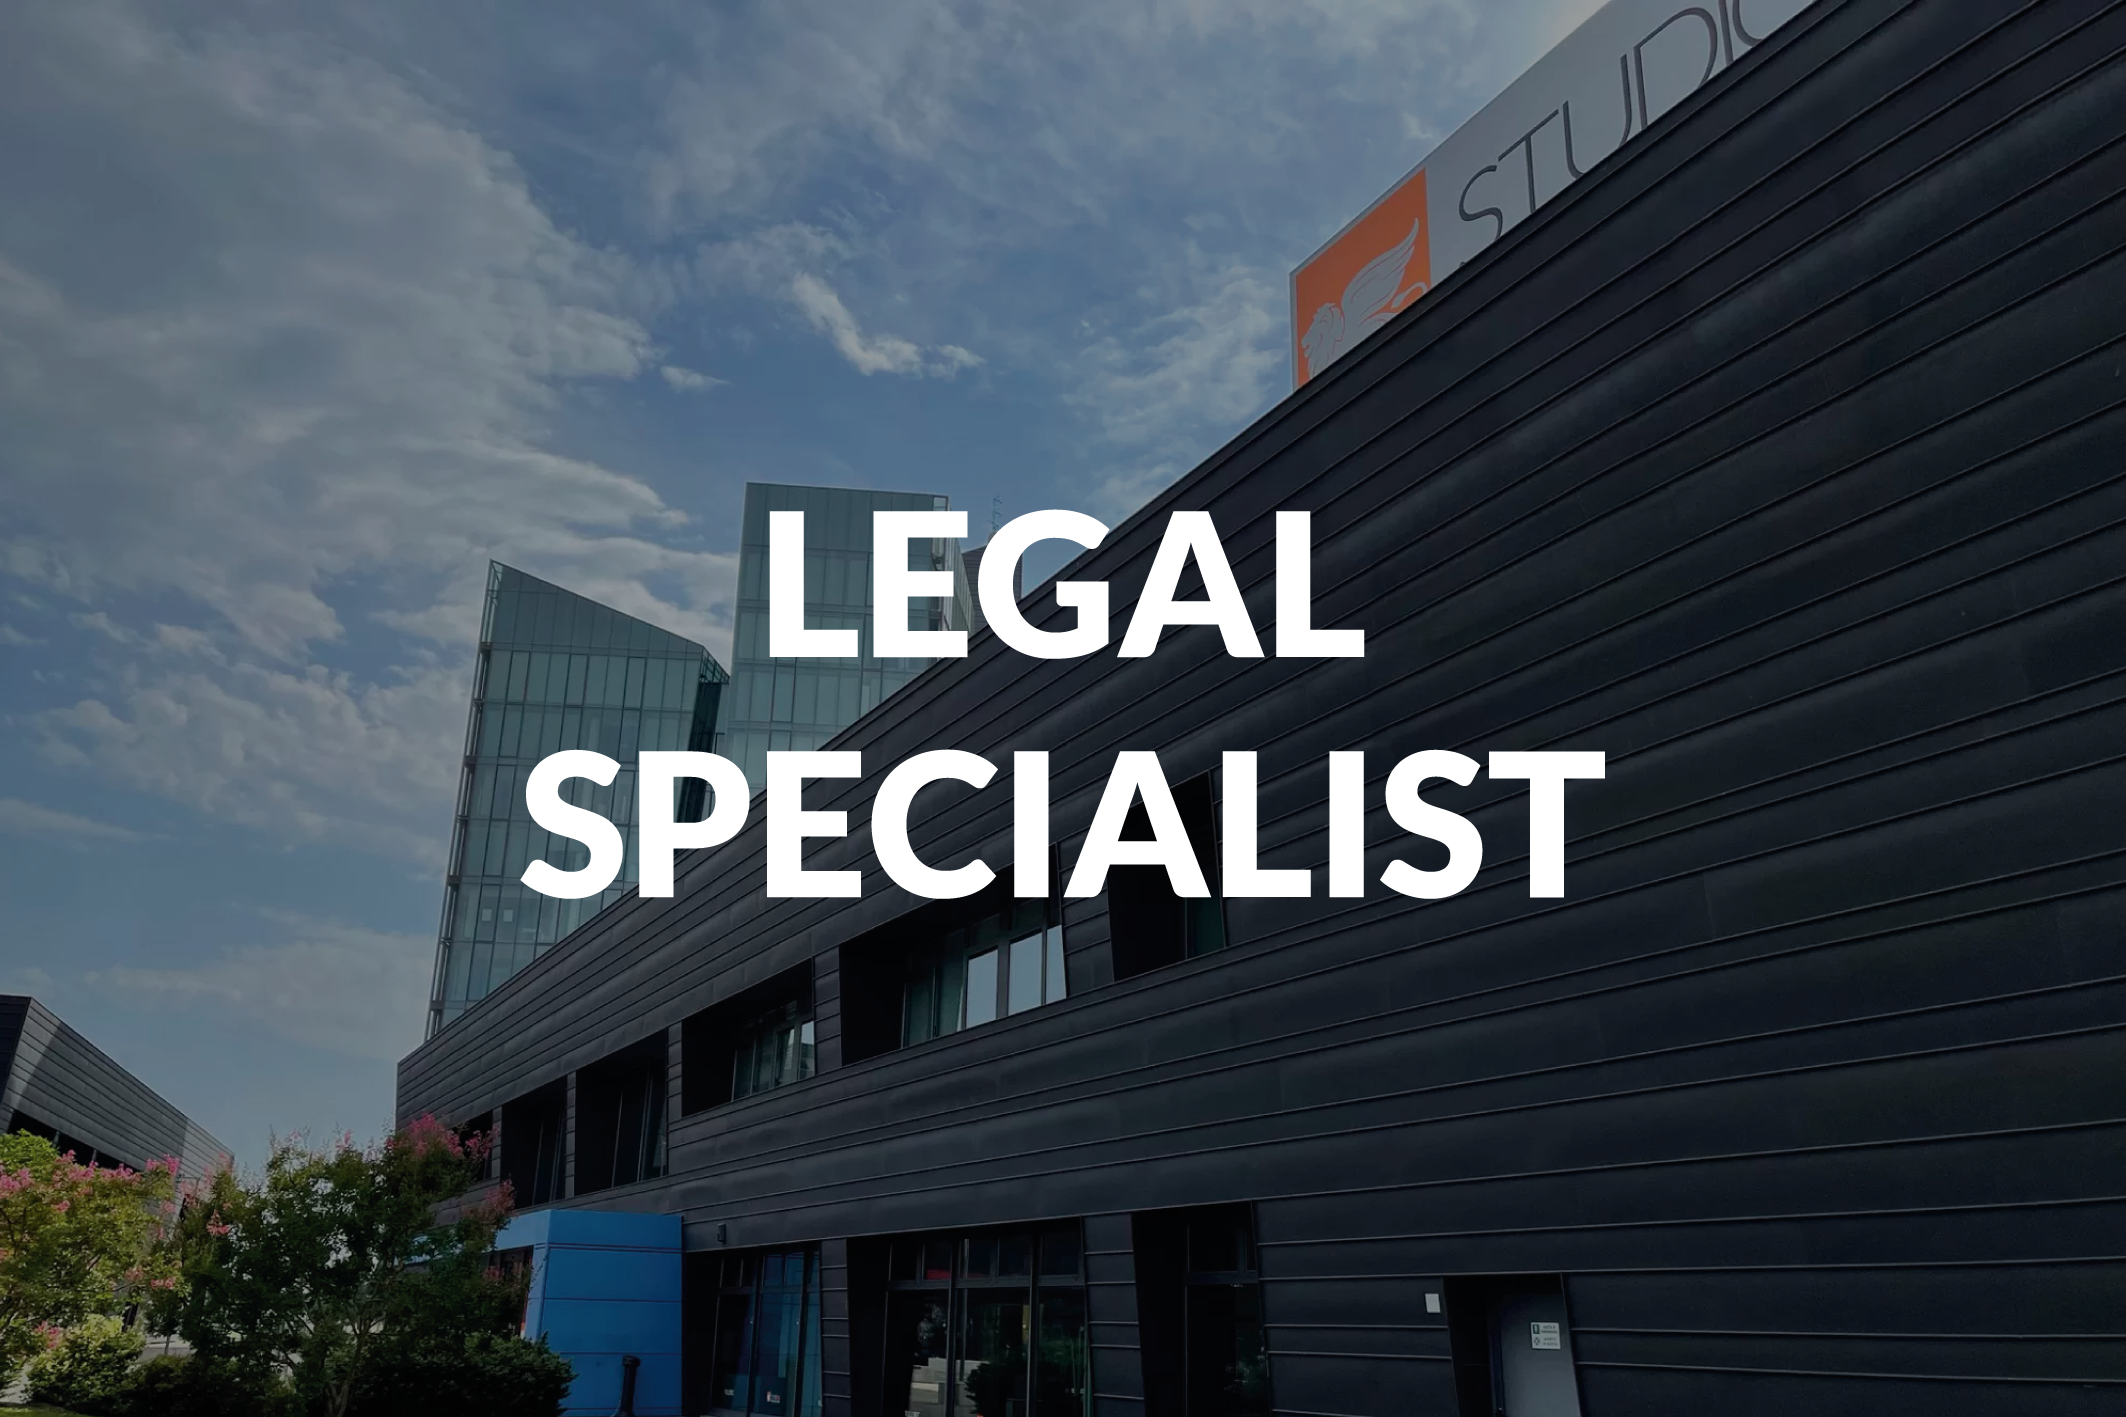 LEGAL SPECIALIST